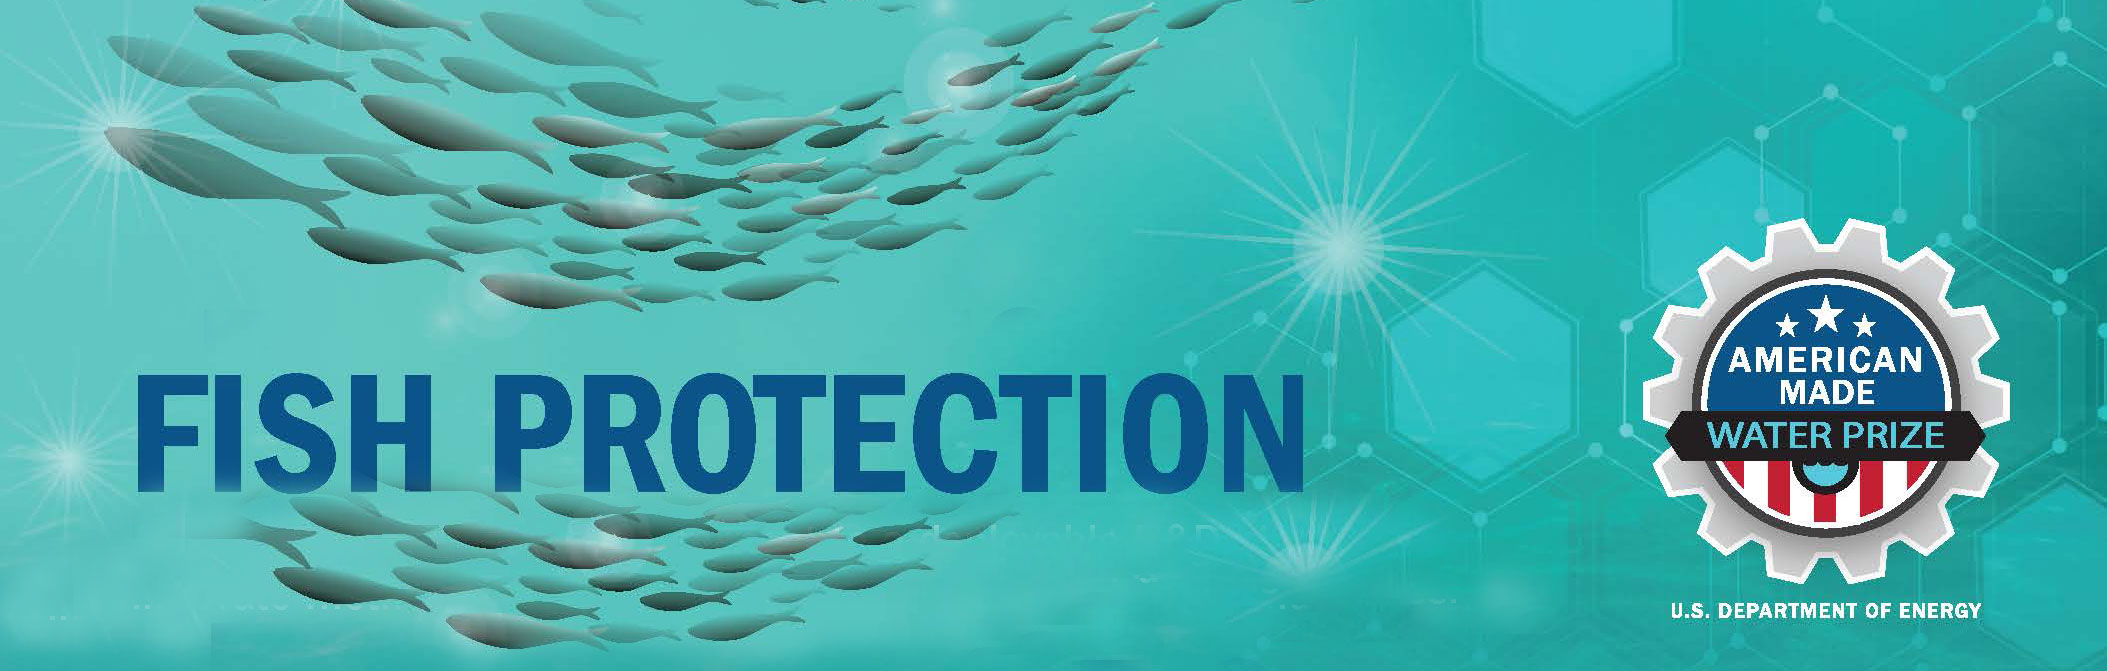 Image of Fish Protection prize competition slide number 3.